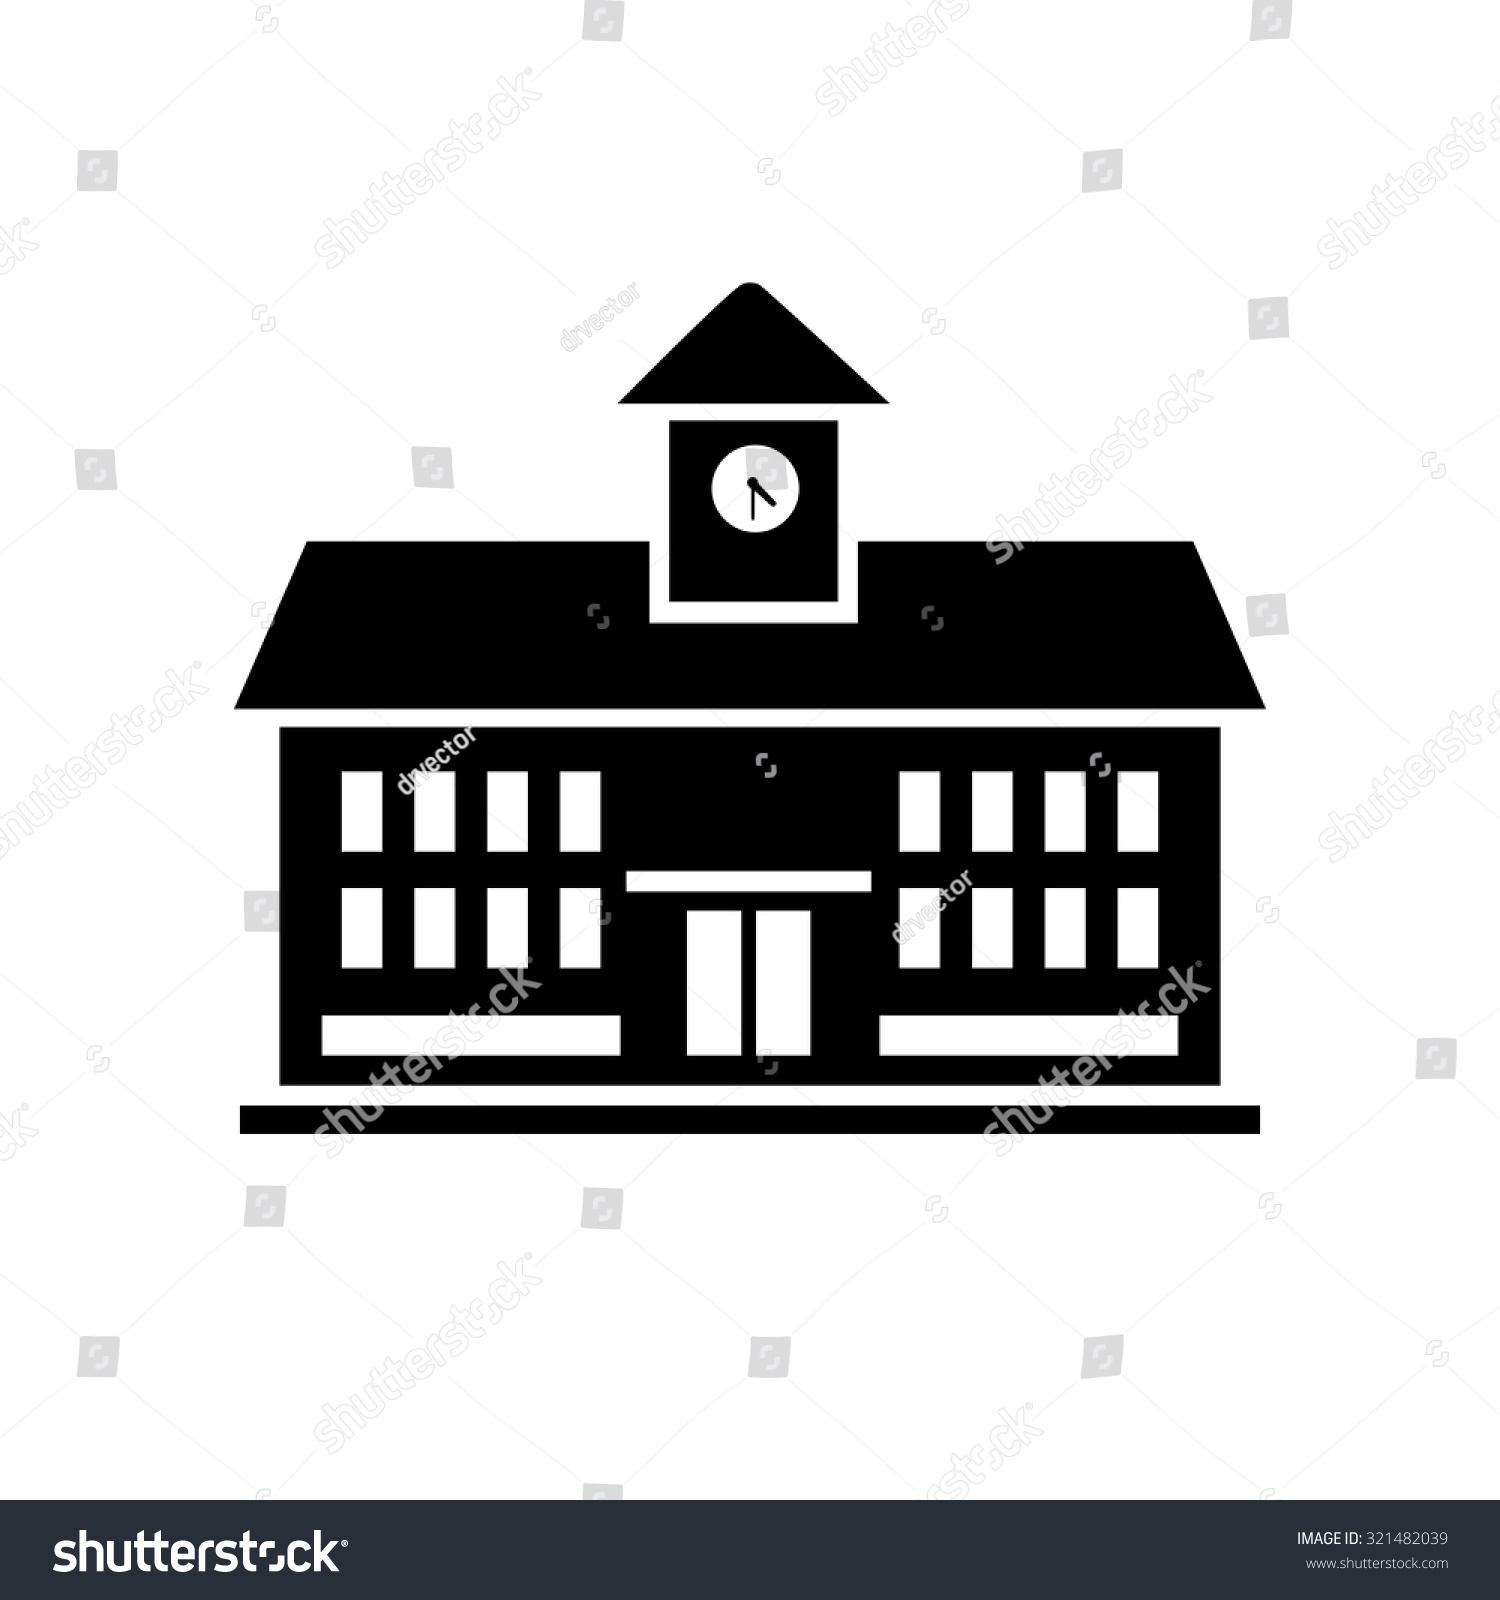 School building icon isolated on white background. 3d render stock 